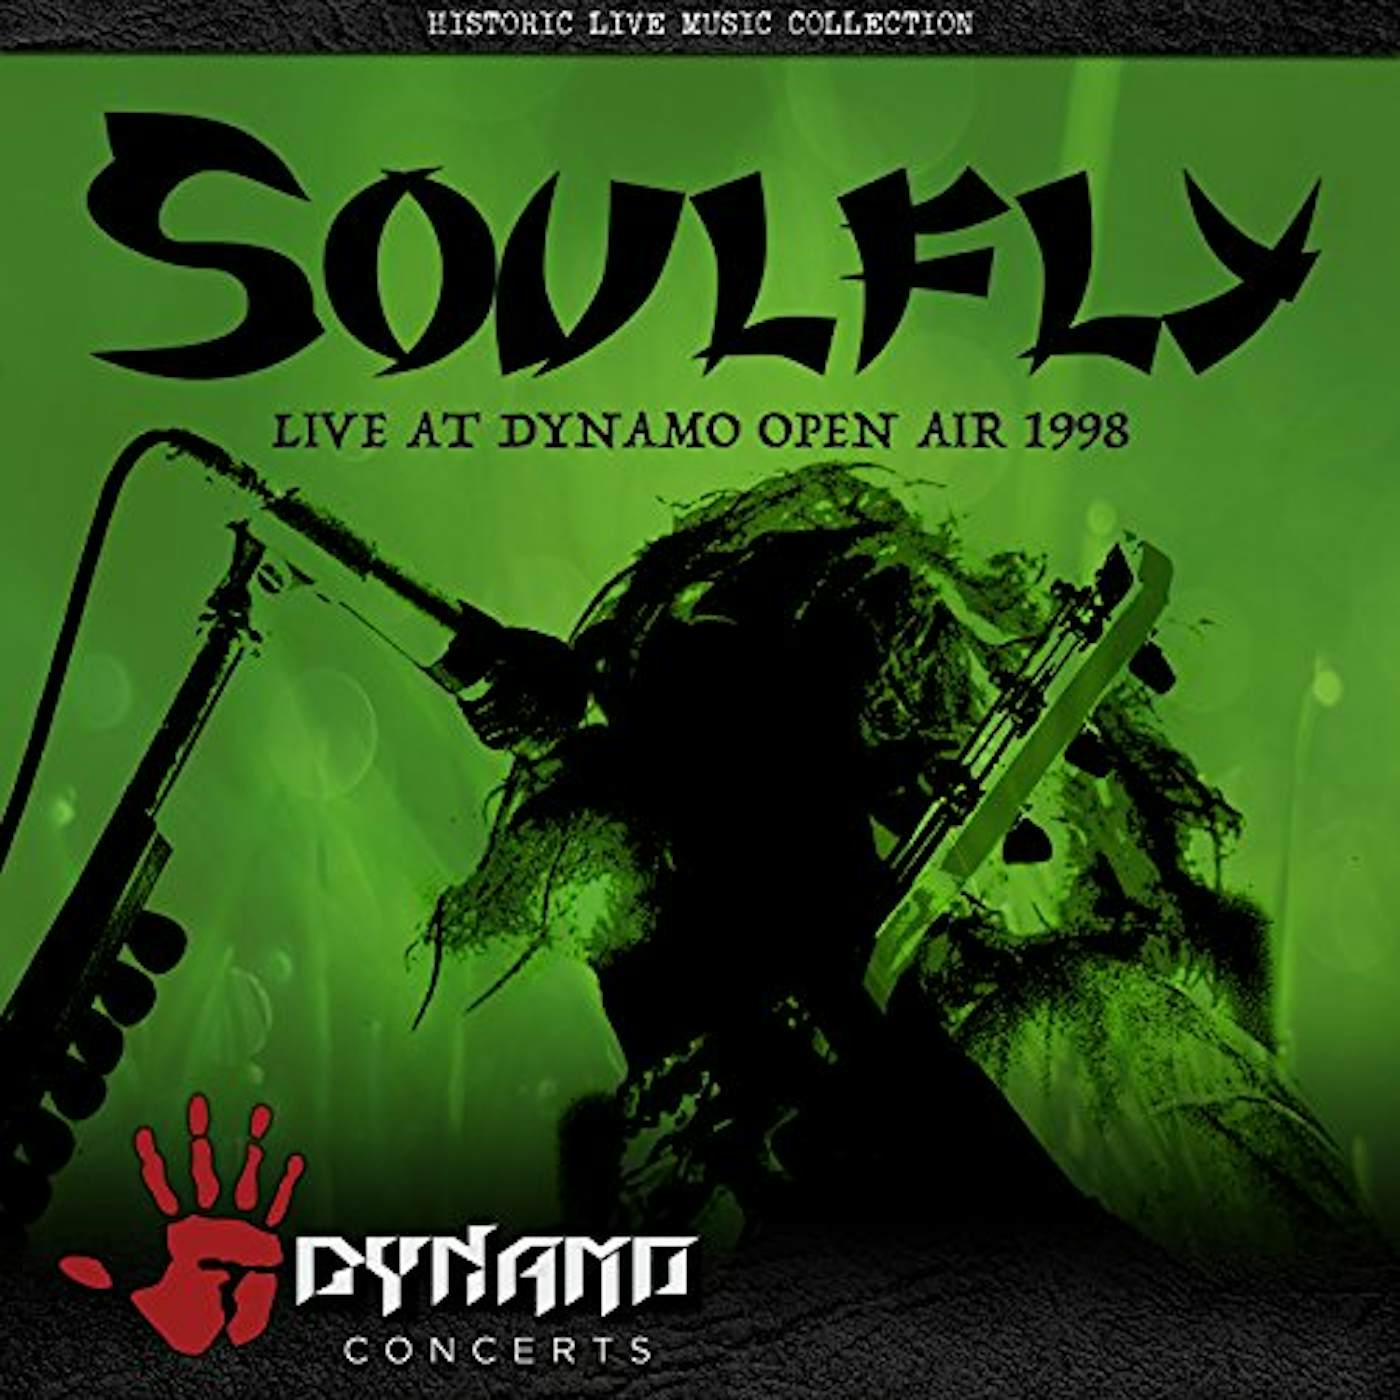 Soulfly Live At Dynamo Open Air 1998 Vinyl Record